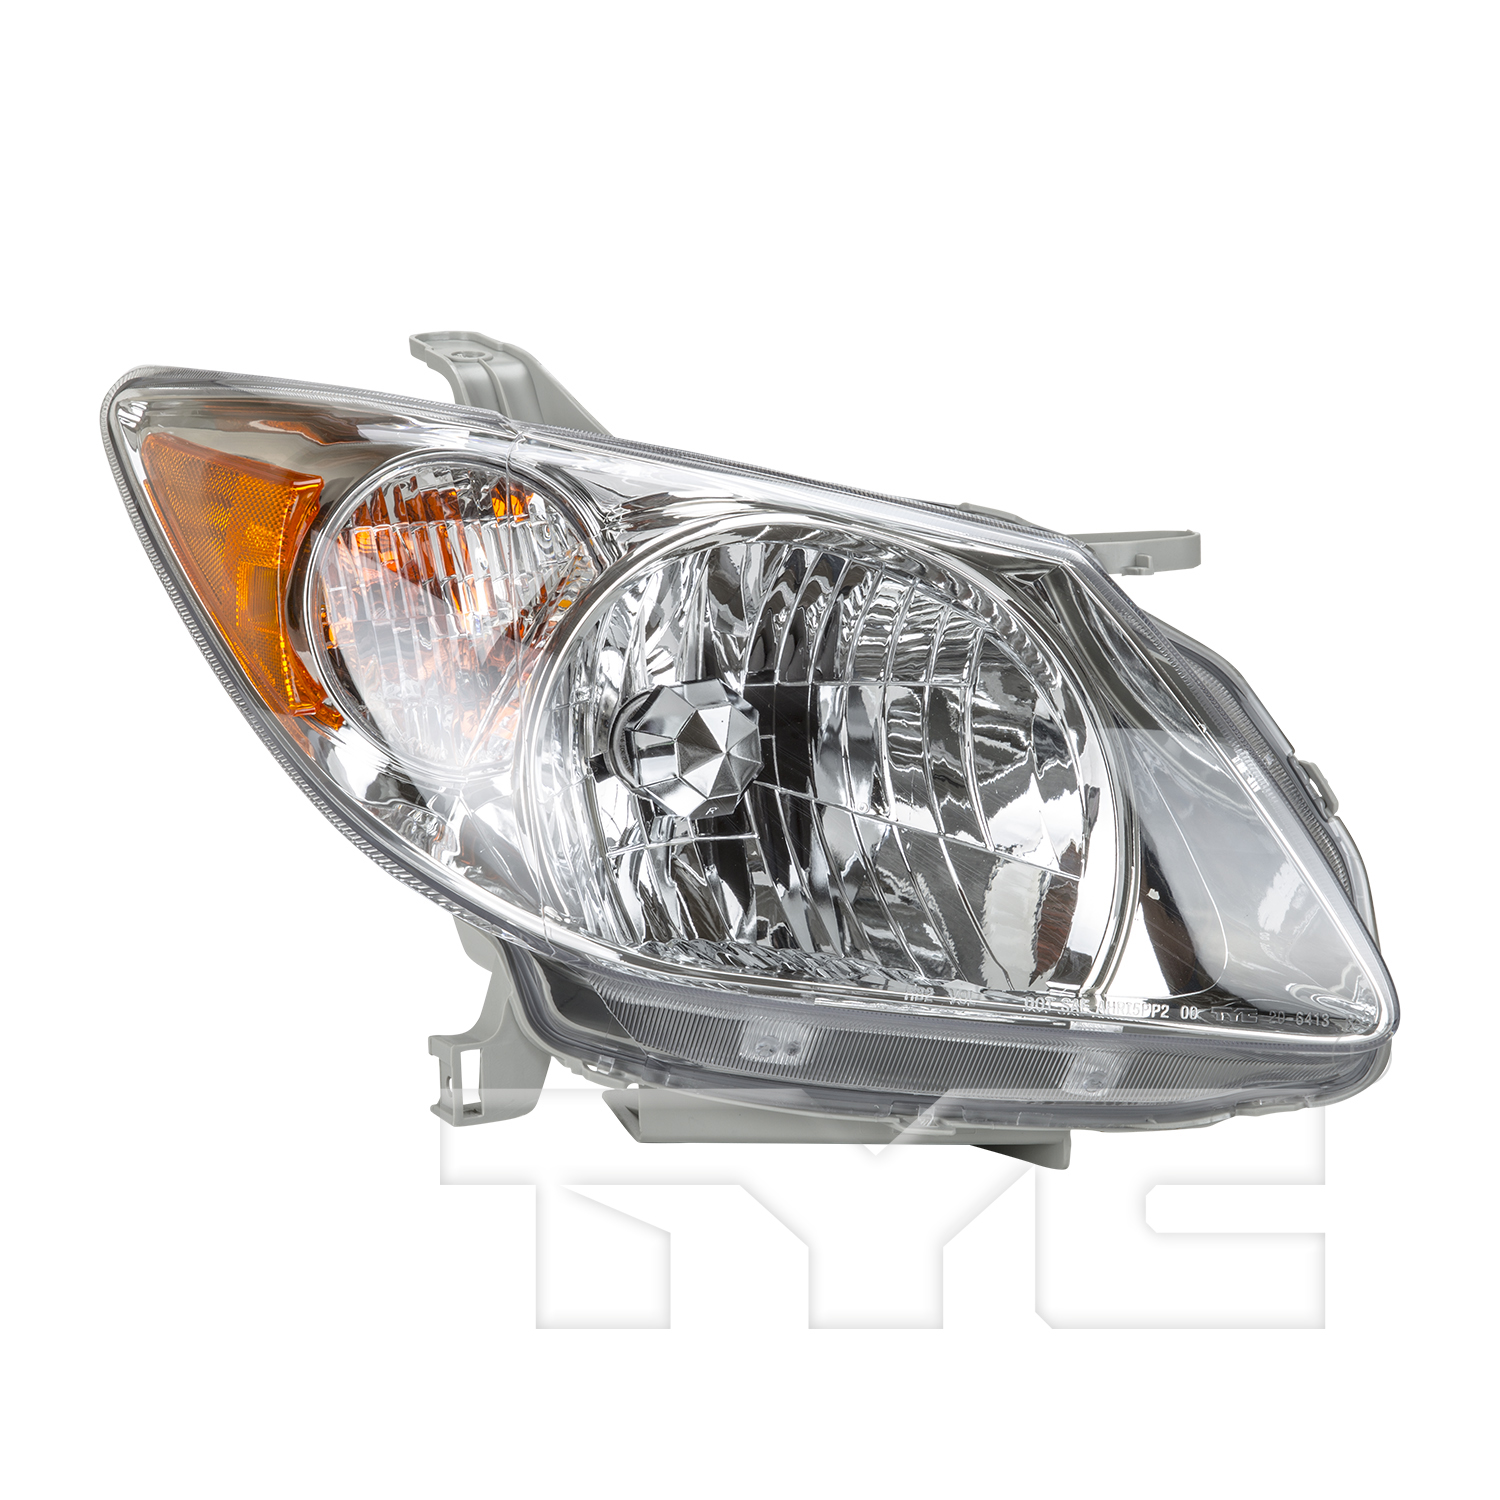 Aftermarket HEADLIGHTS for PONTIAC - VIBE, VIBE,05-08,RT Headlamp assy composite